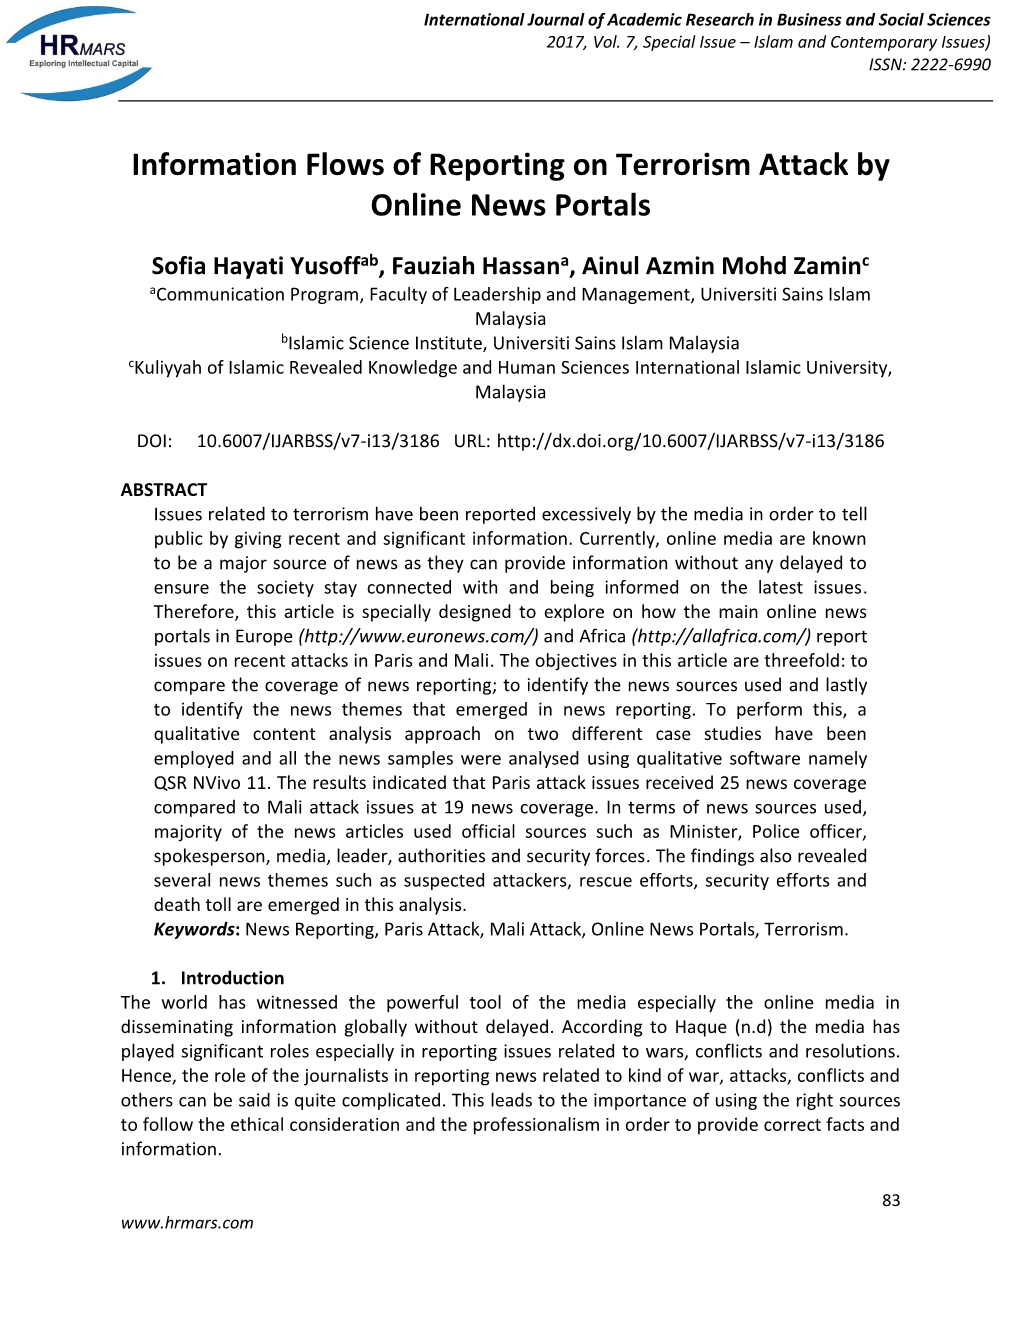 Information Flows of Reporting on Terrorism Attack by Online News Portals